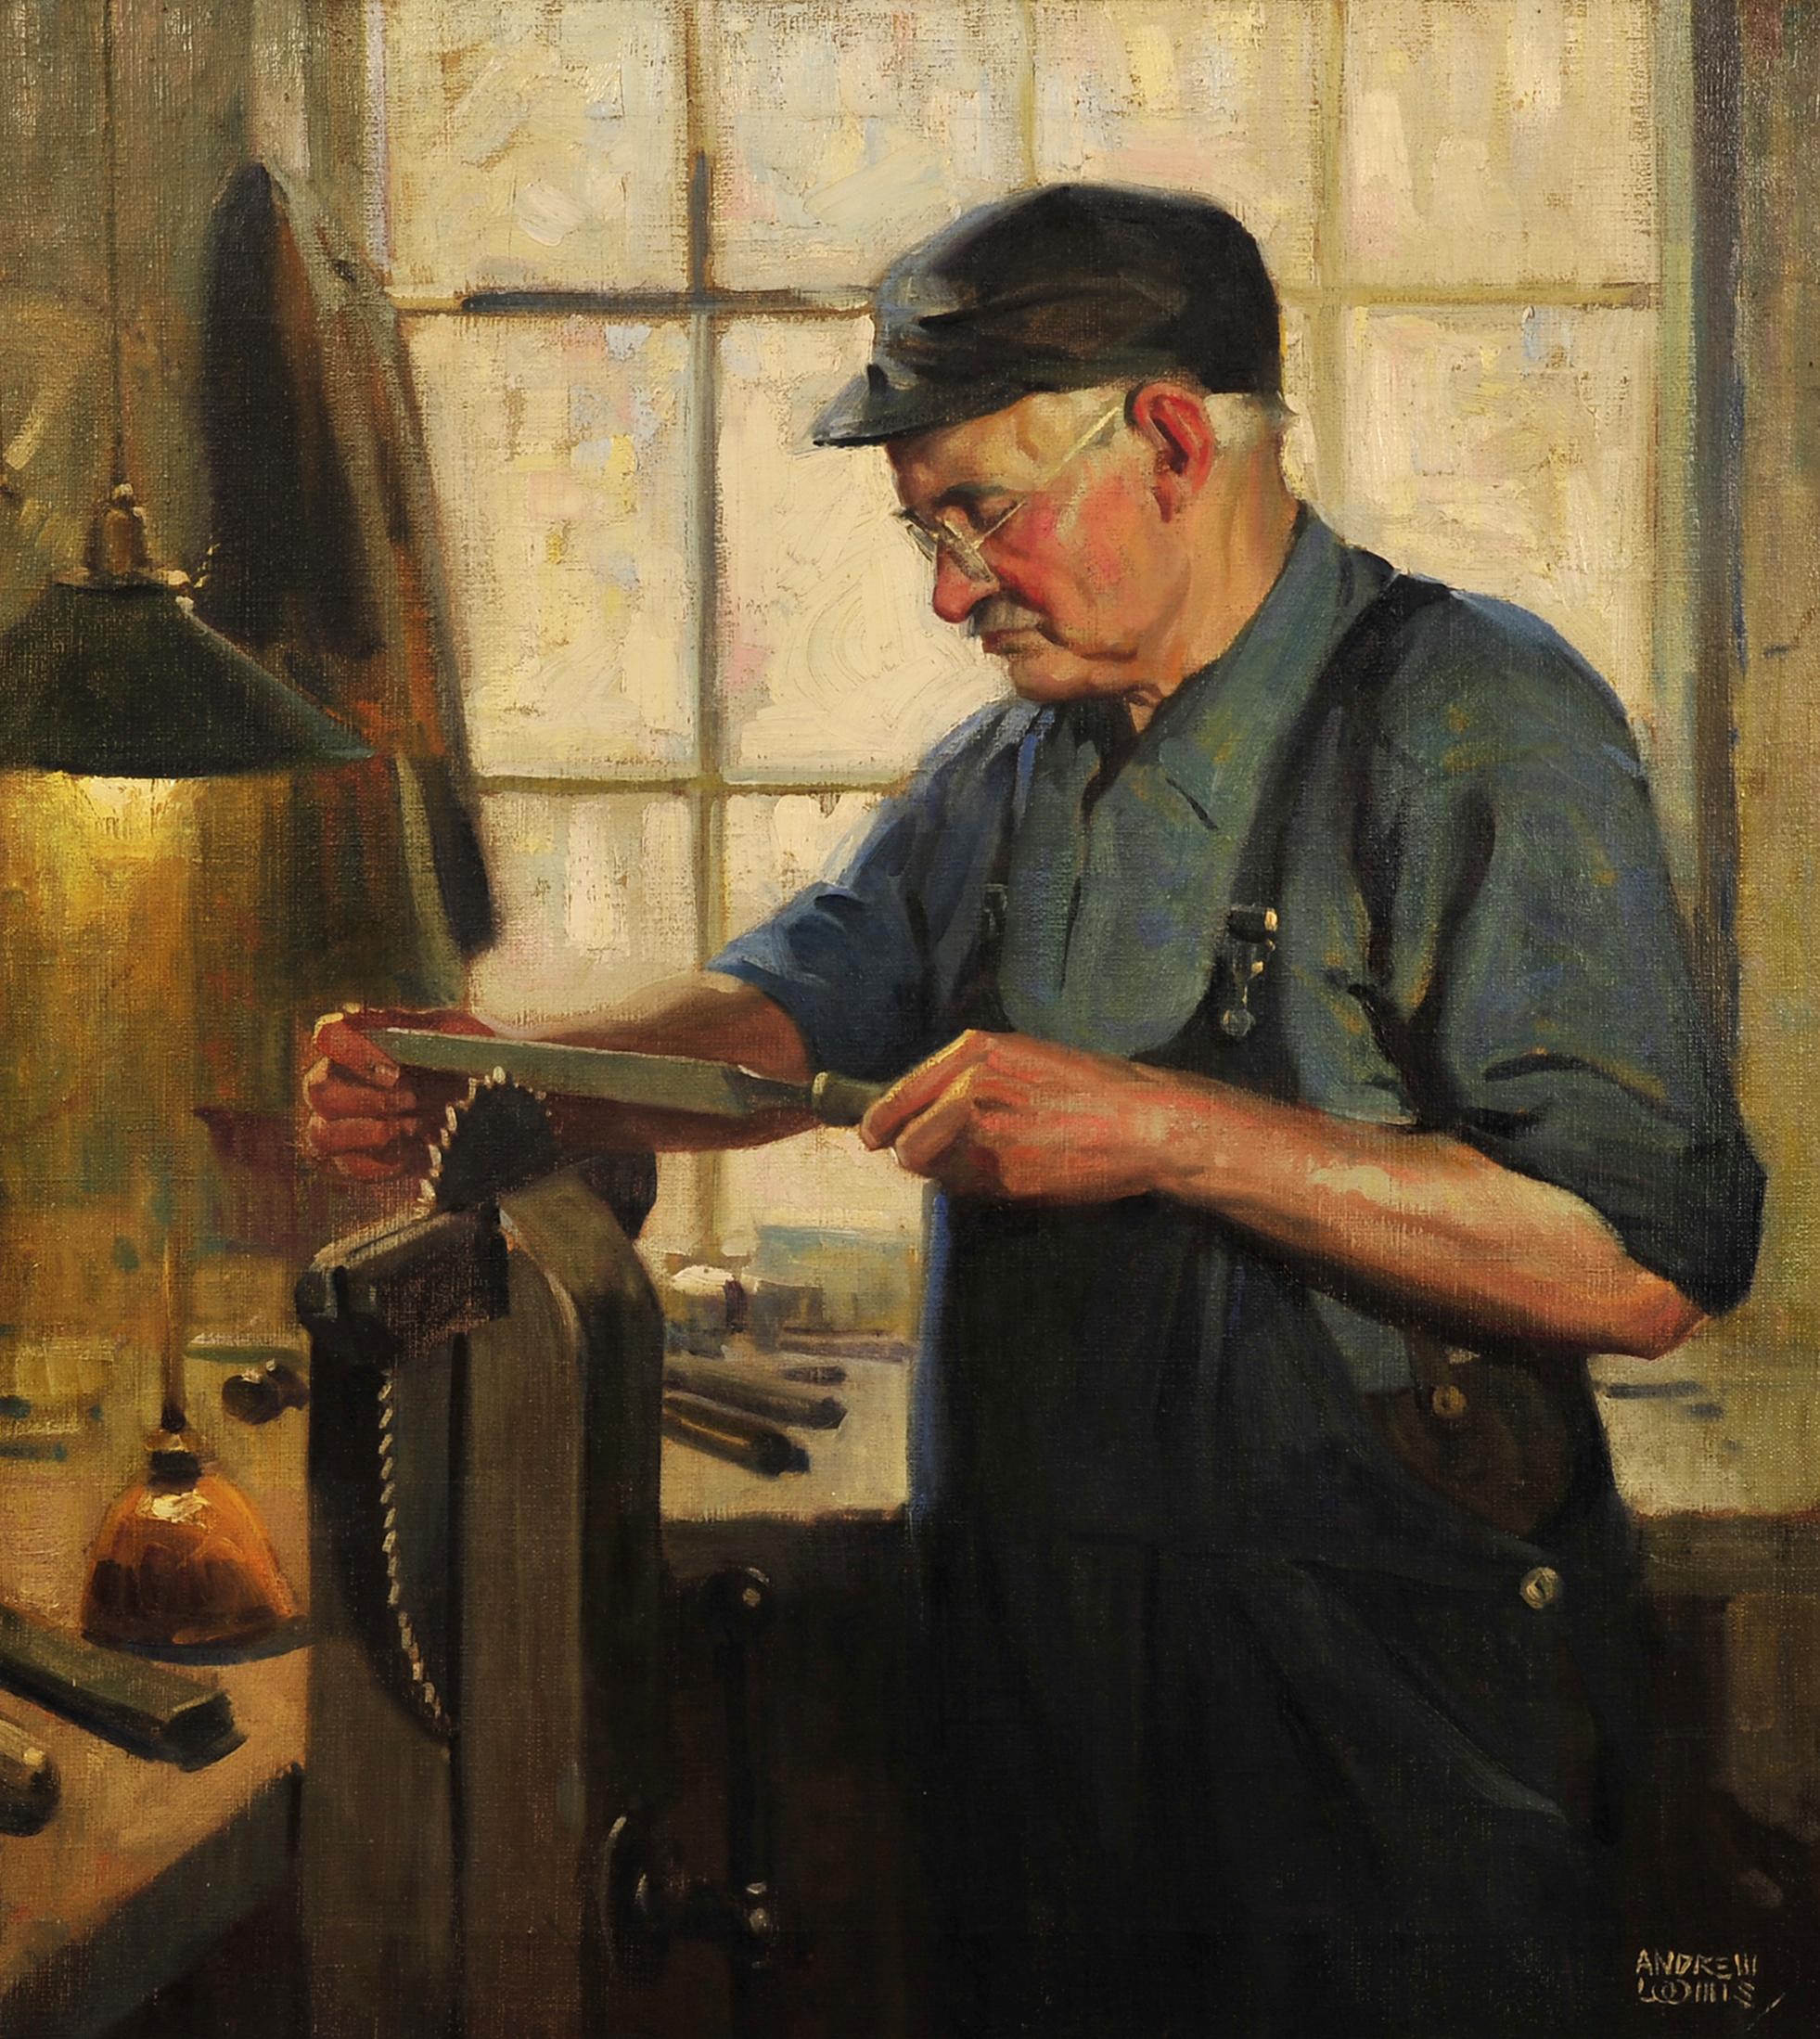 Man in His Shop - Painting by Andrew Loomis